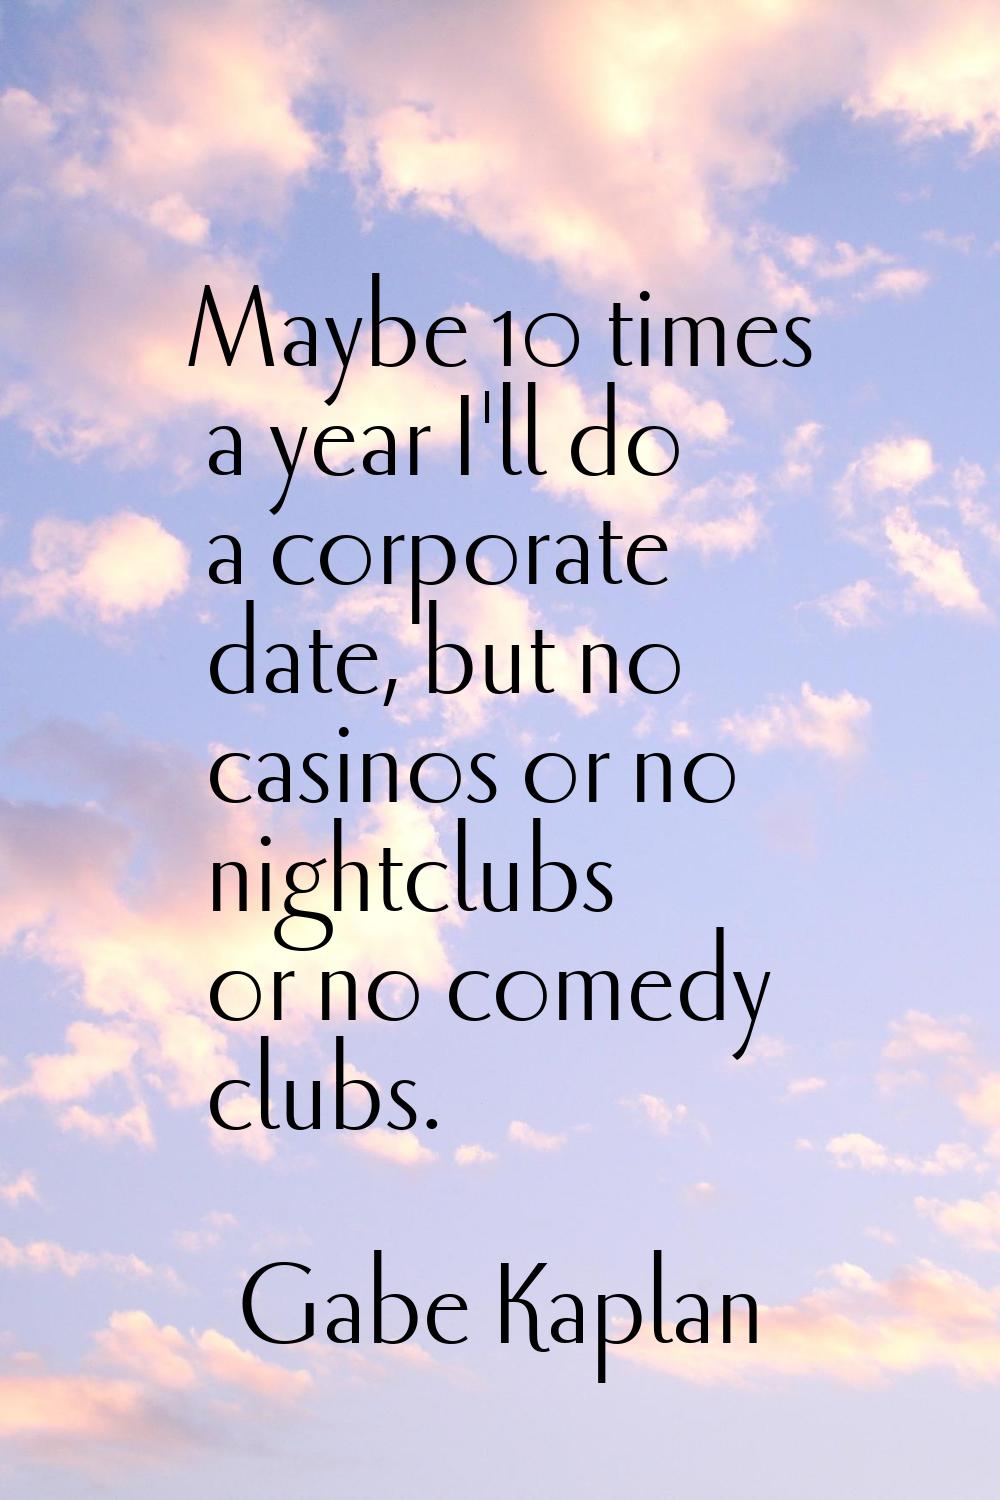 Maybe 10 times a year I'll do a corporate date, but no casinos or no nightclubs or no comedy clubs.